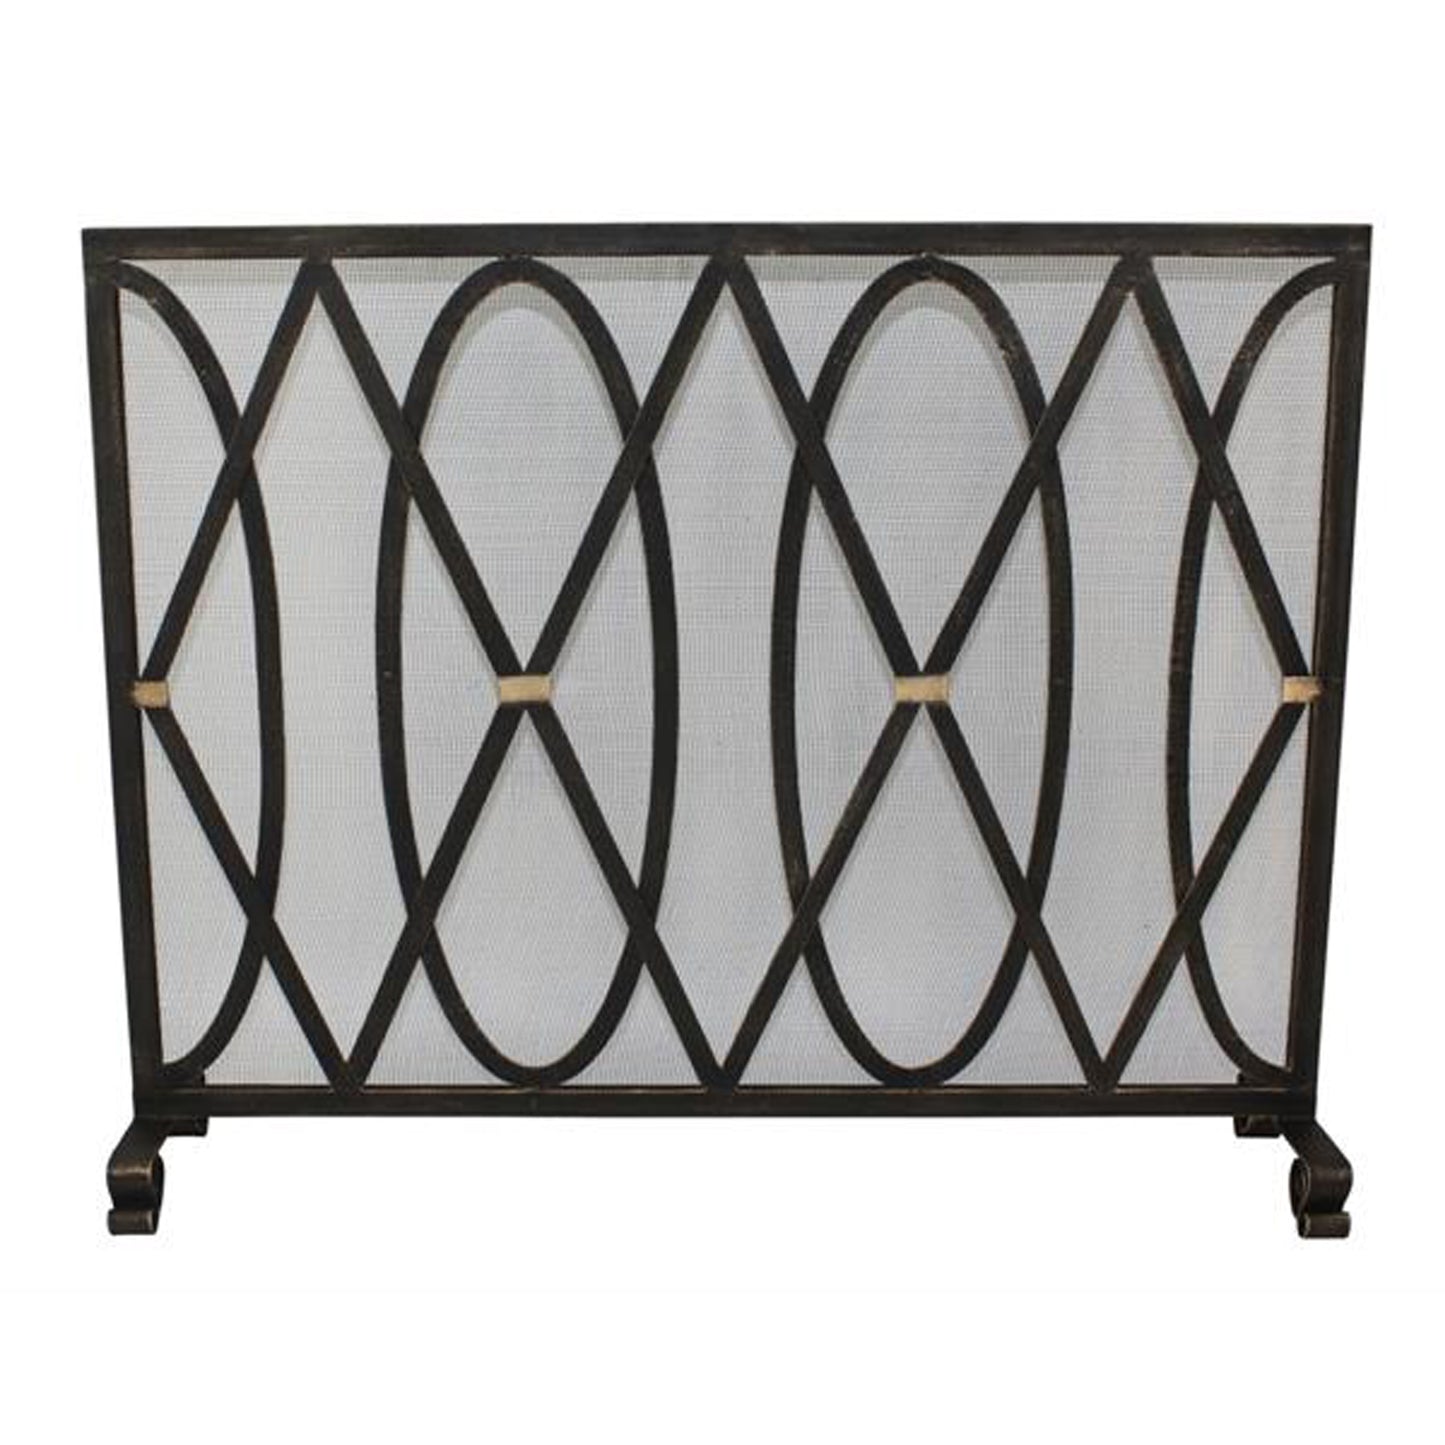 Single Panel Fireplace Screen in Burnished Gold Oval and Diamond Design